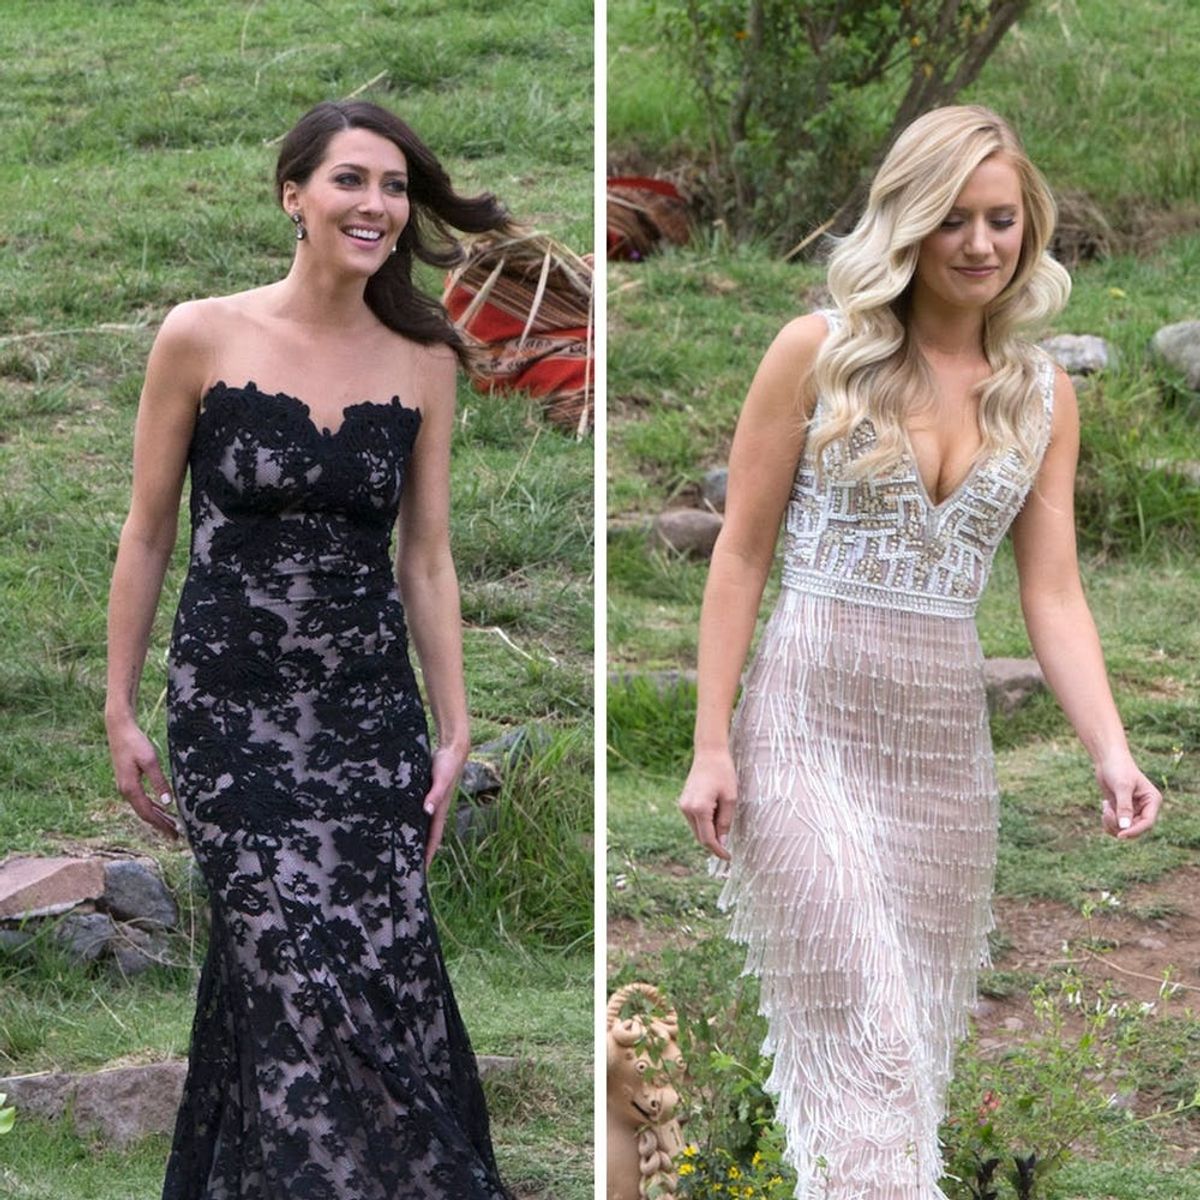 Here Are the Exact Dresses the Bachelor Finalists Wore to Last Night’s Final Rose Ceremony